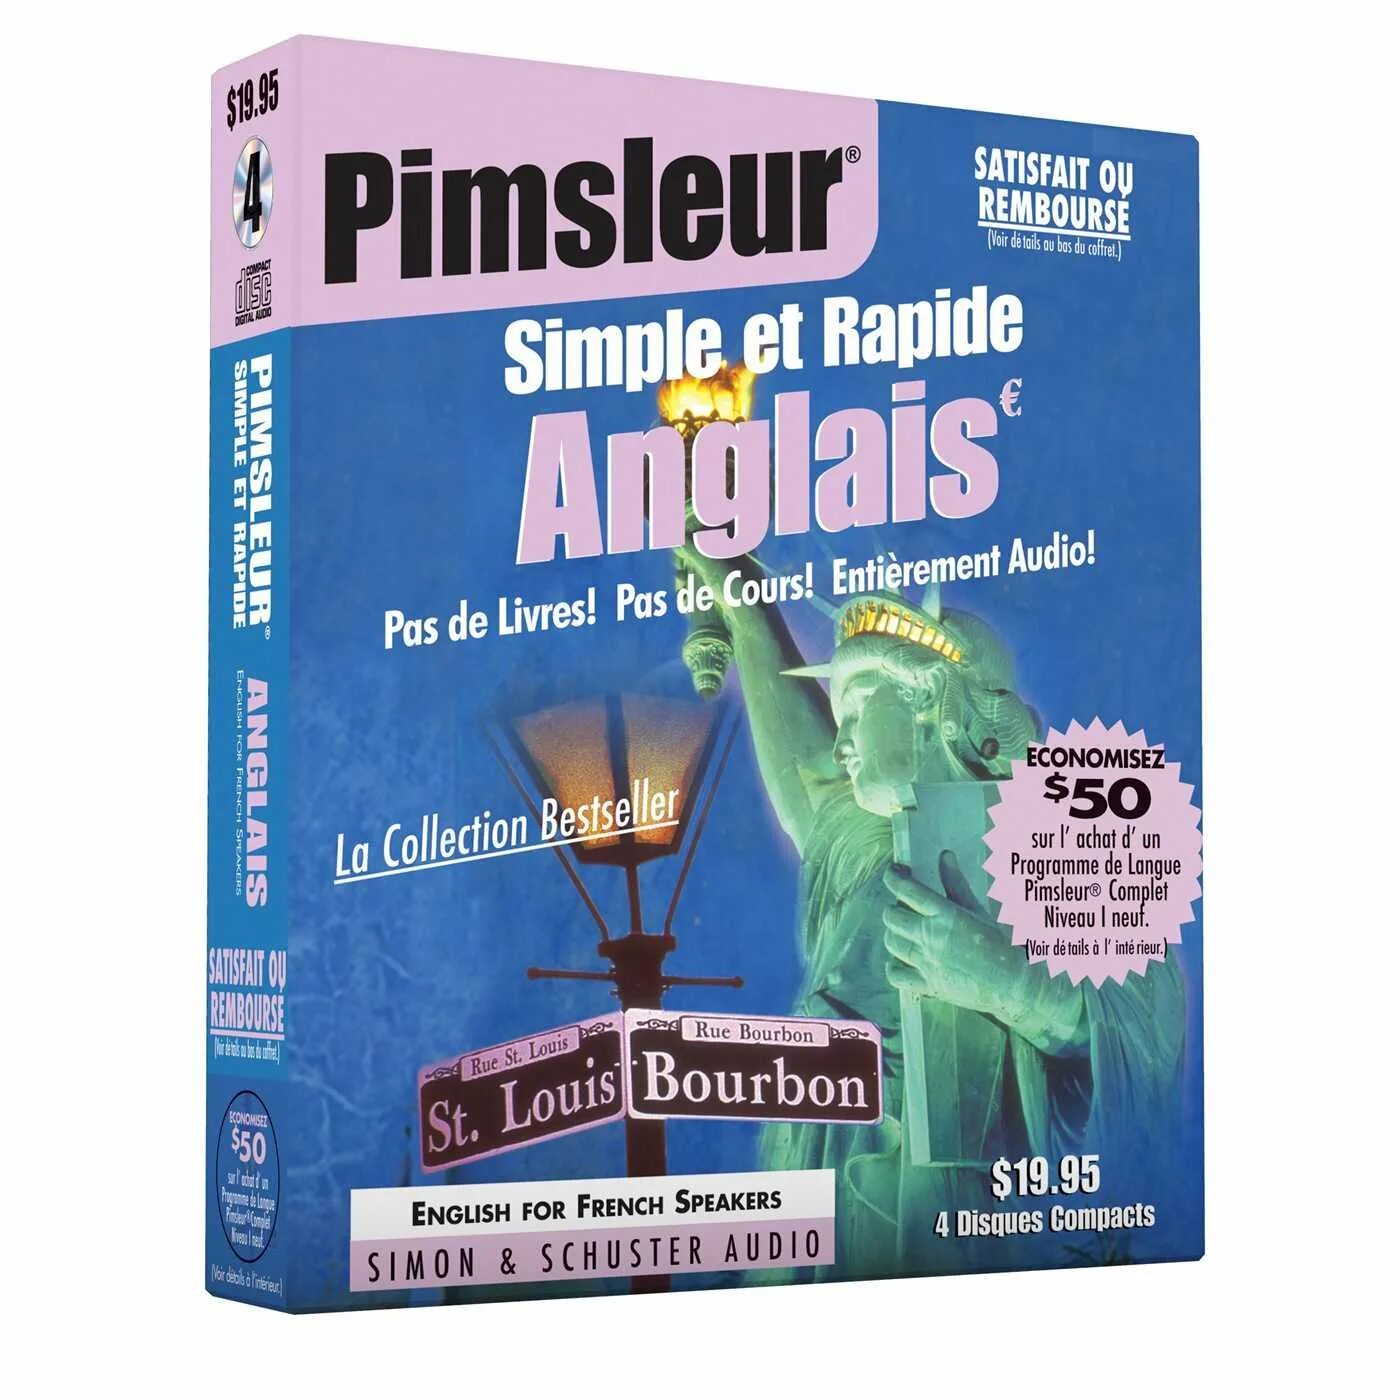 Pimsleur. Pimsleur French. Пимслер английский. Pimsleur English for Russian Speakers. Слушать английский метод пимслера